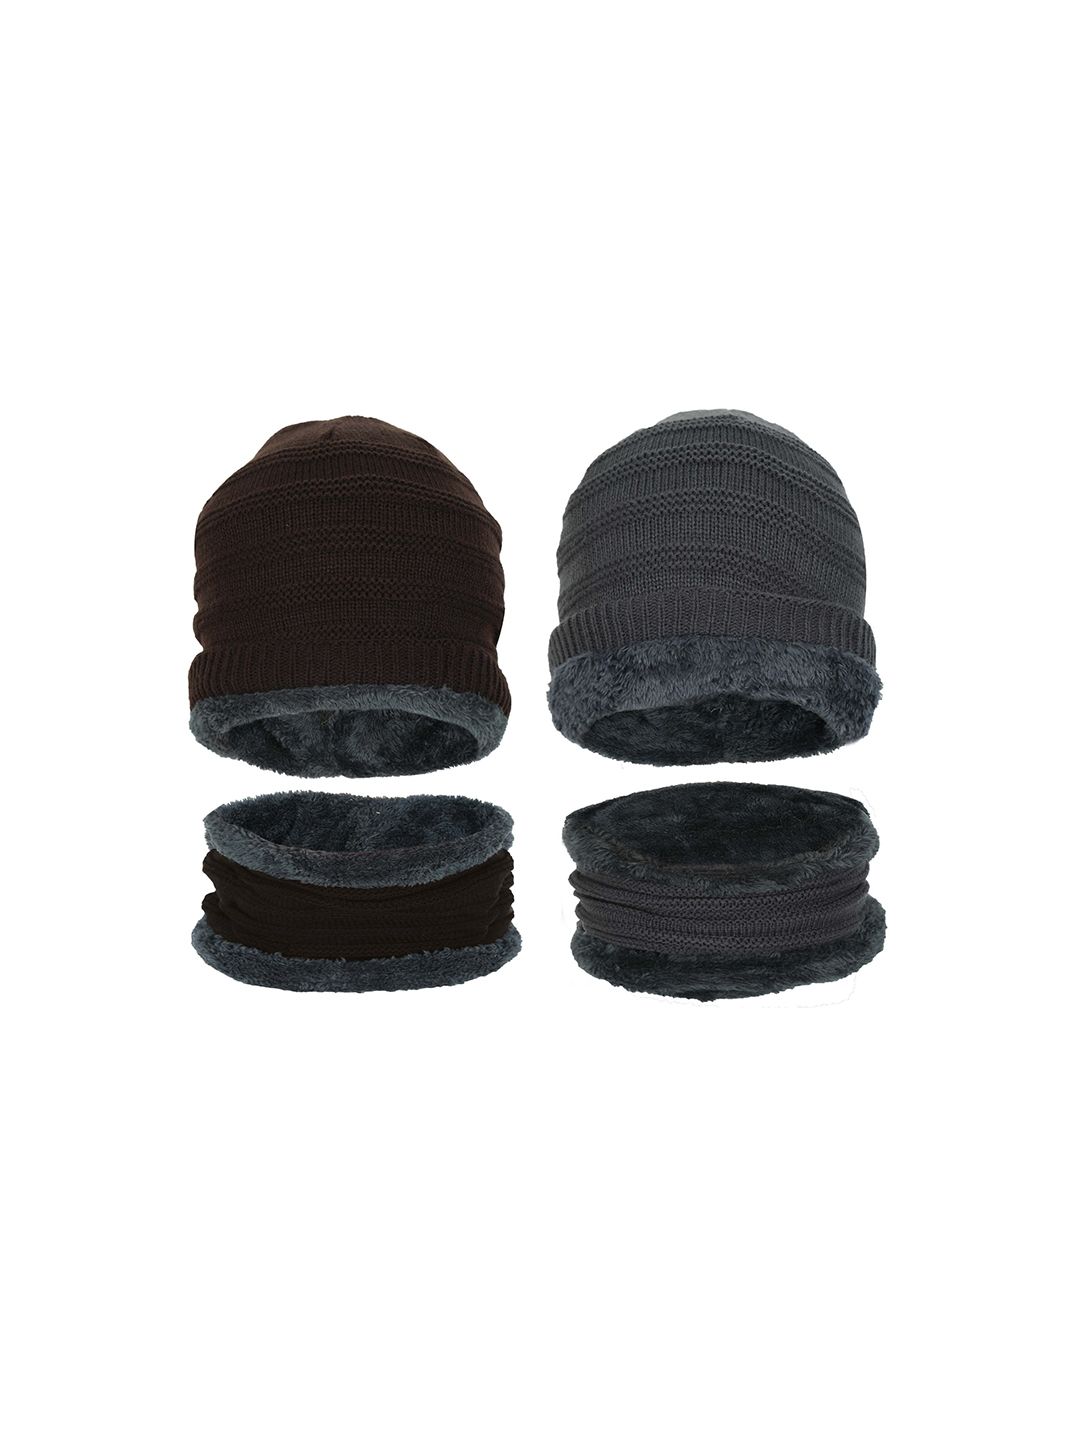 FabSeasons Unisex Brown & Grey Set of 2 Beanie and Mufflers Price in India